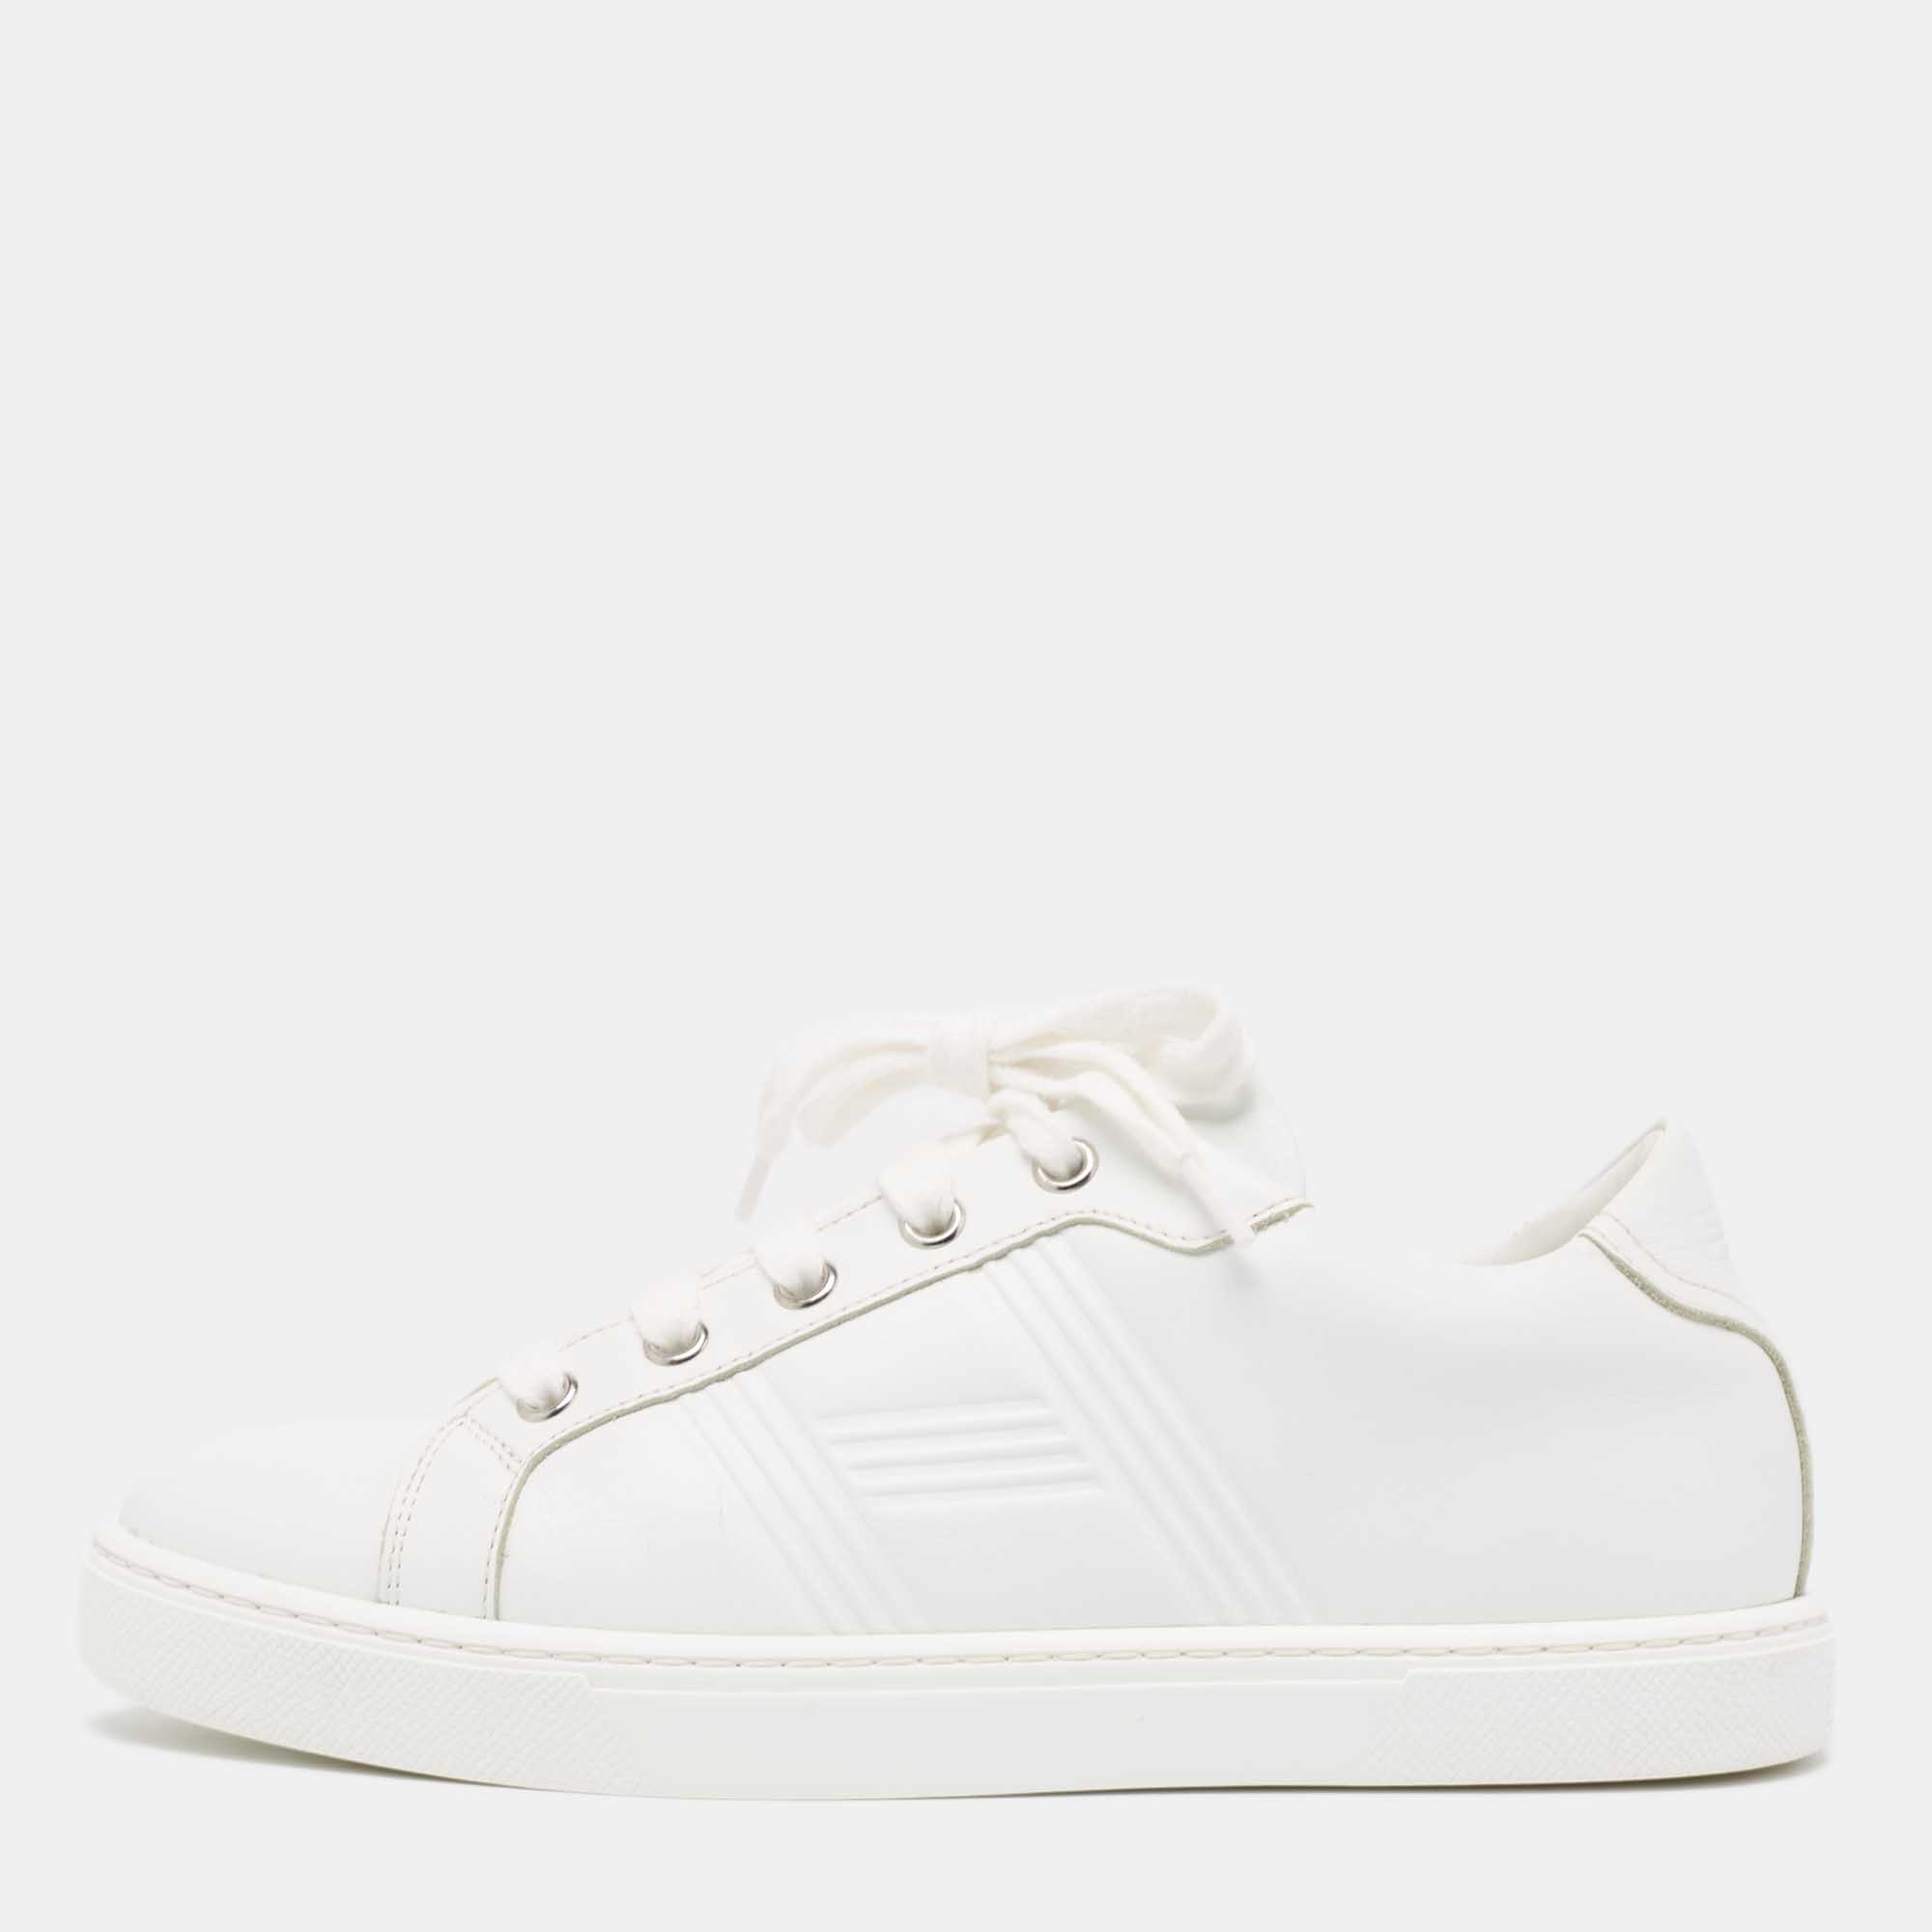 Hermes white leather quicker sneakers size 36